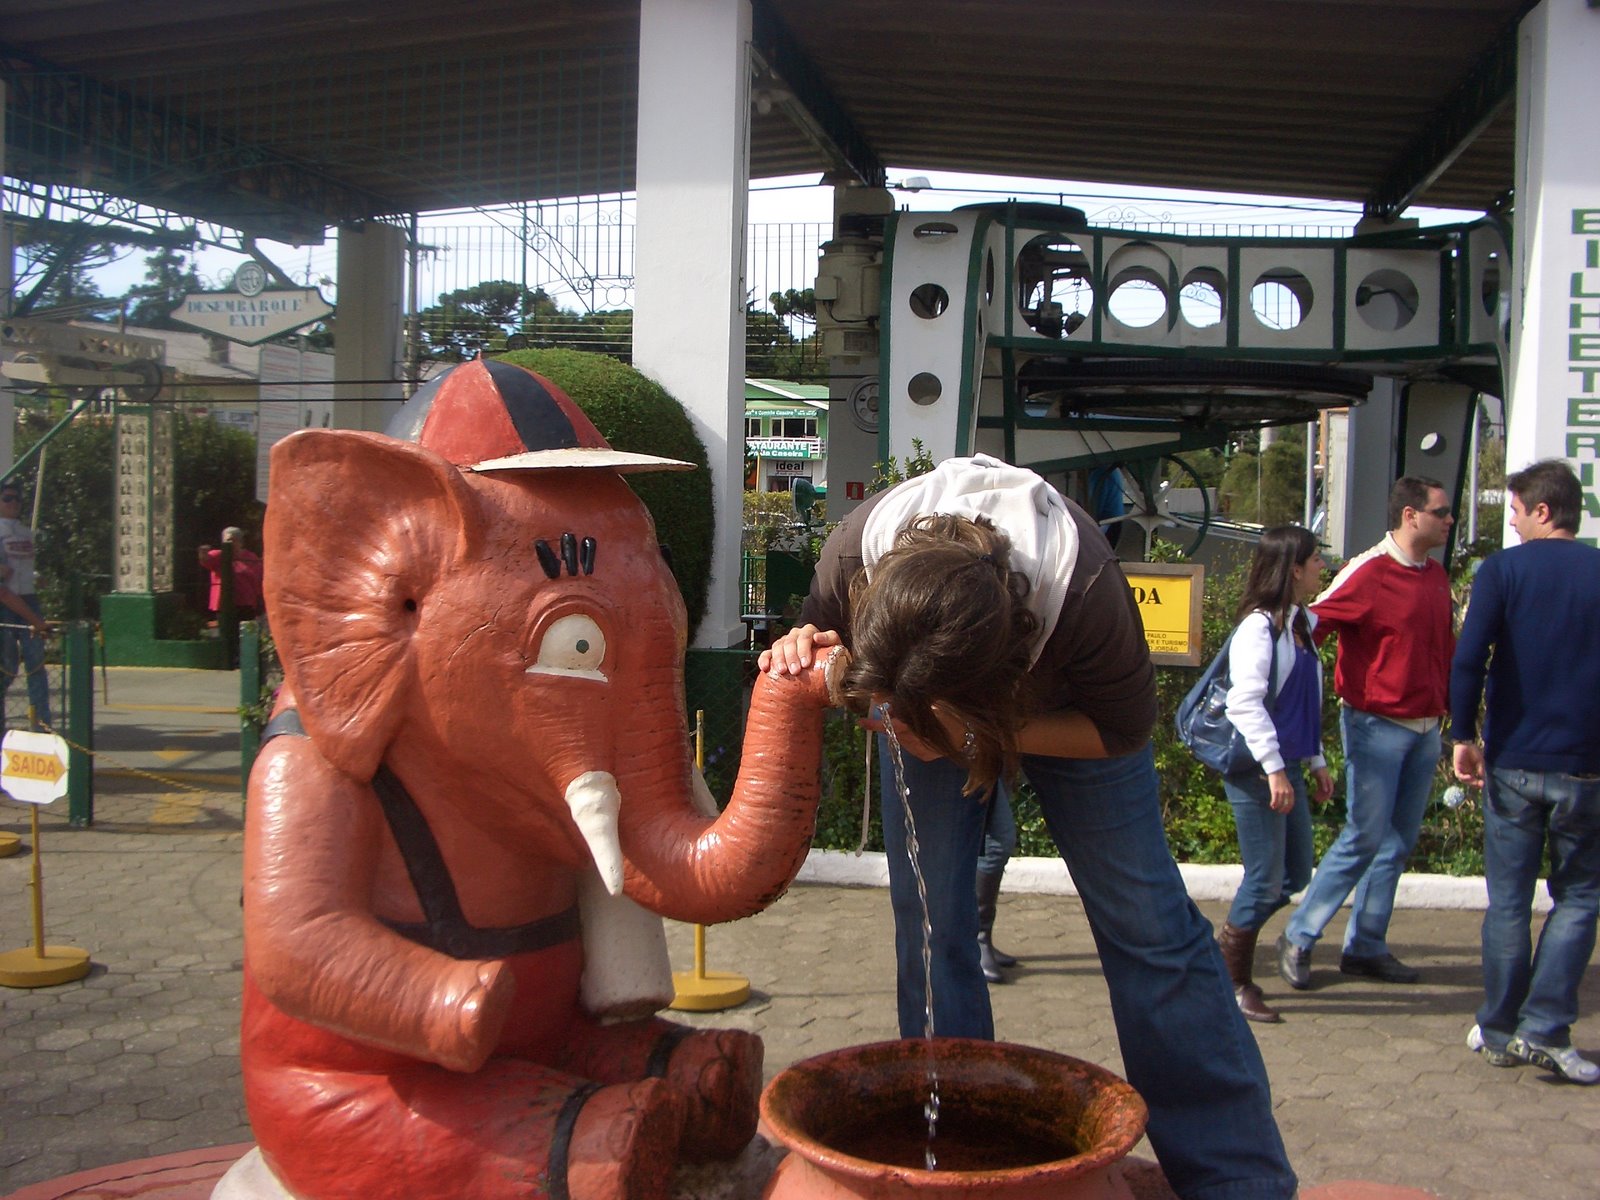 [drinking+from+the+elephant.JPG]